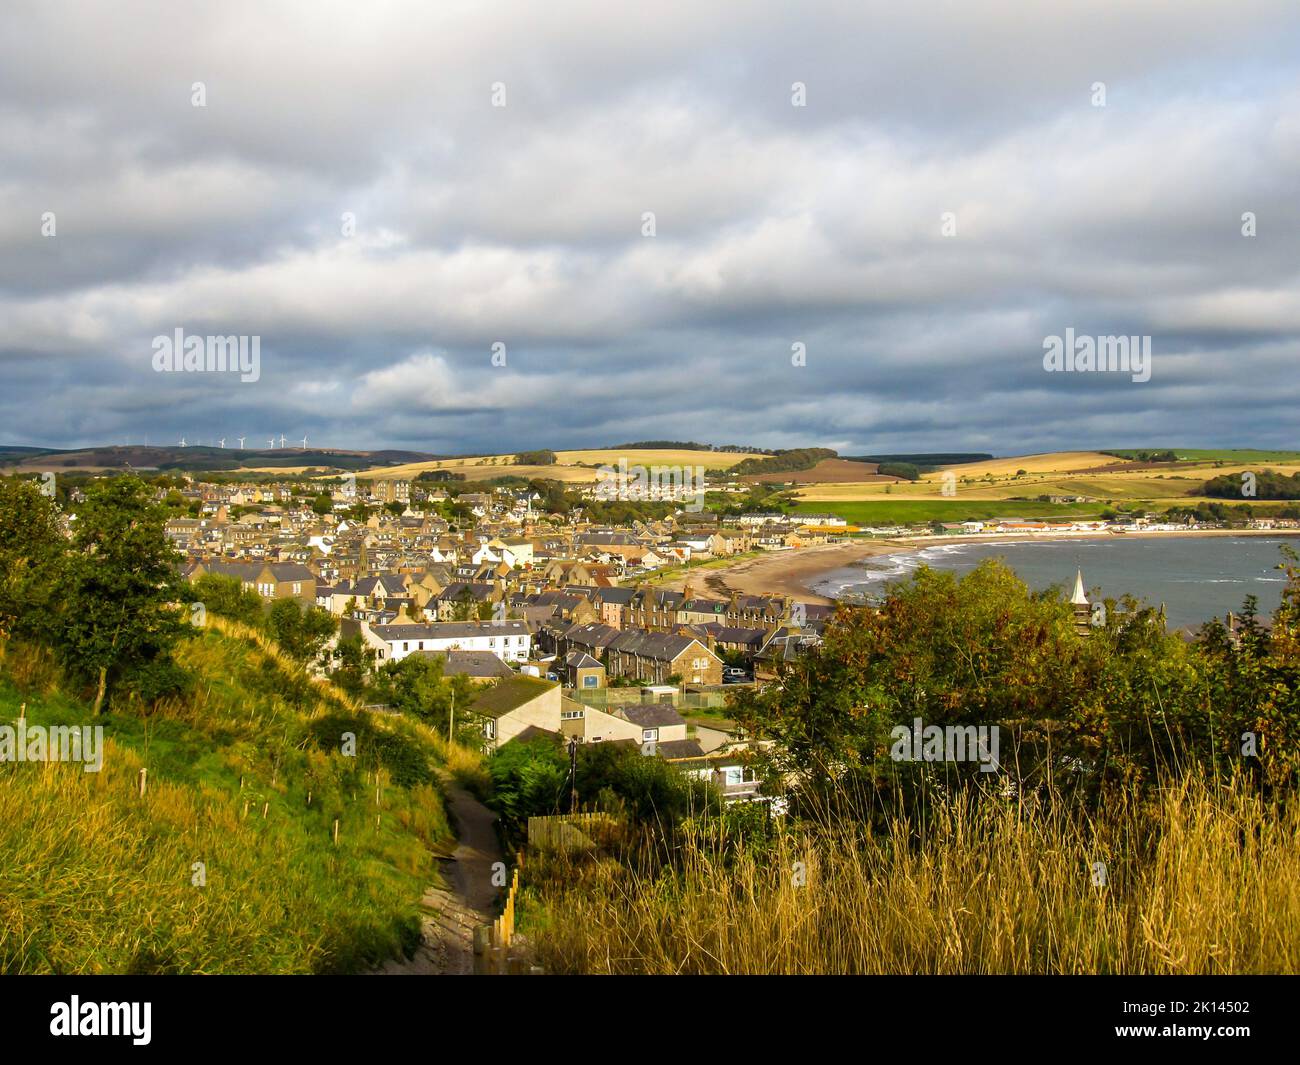 Picturesque view of the Scottish fishing village of Stonehaven, with a dramatic stormy sky in the background Stock Photo